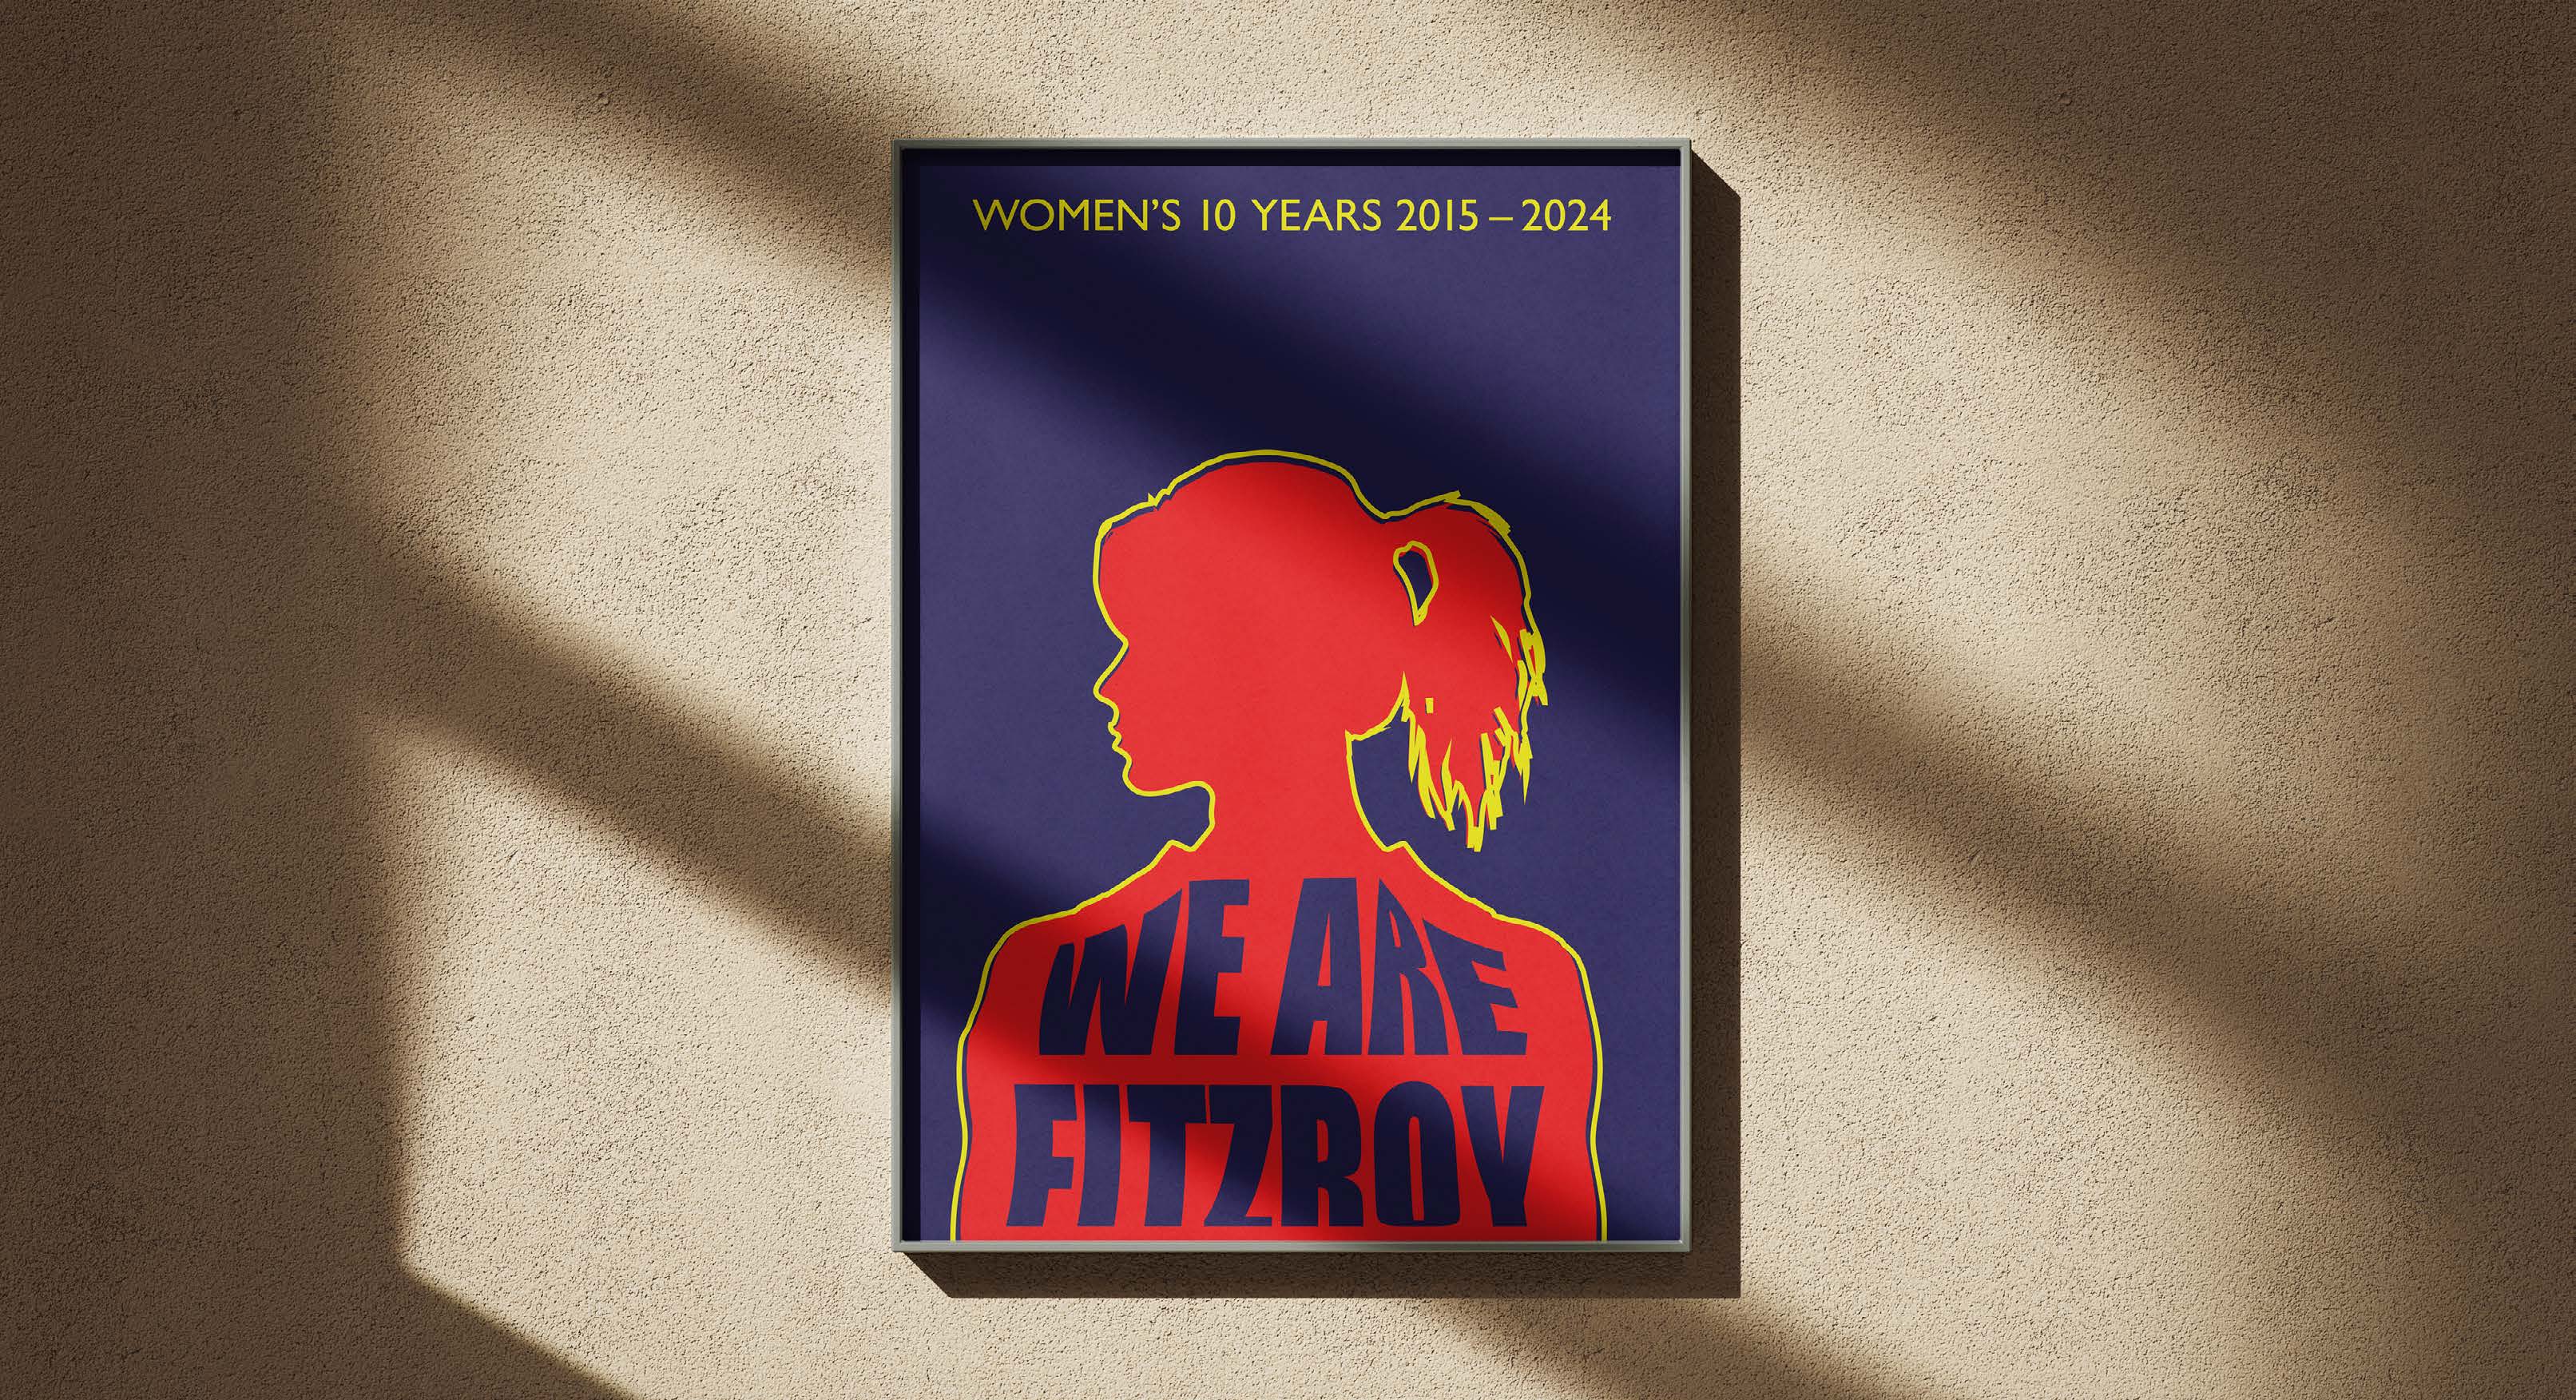 Fitzroy Women's 10th anniversary posters